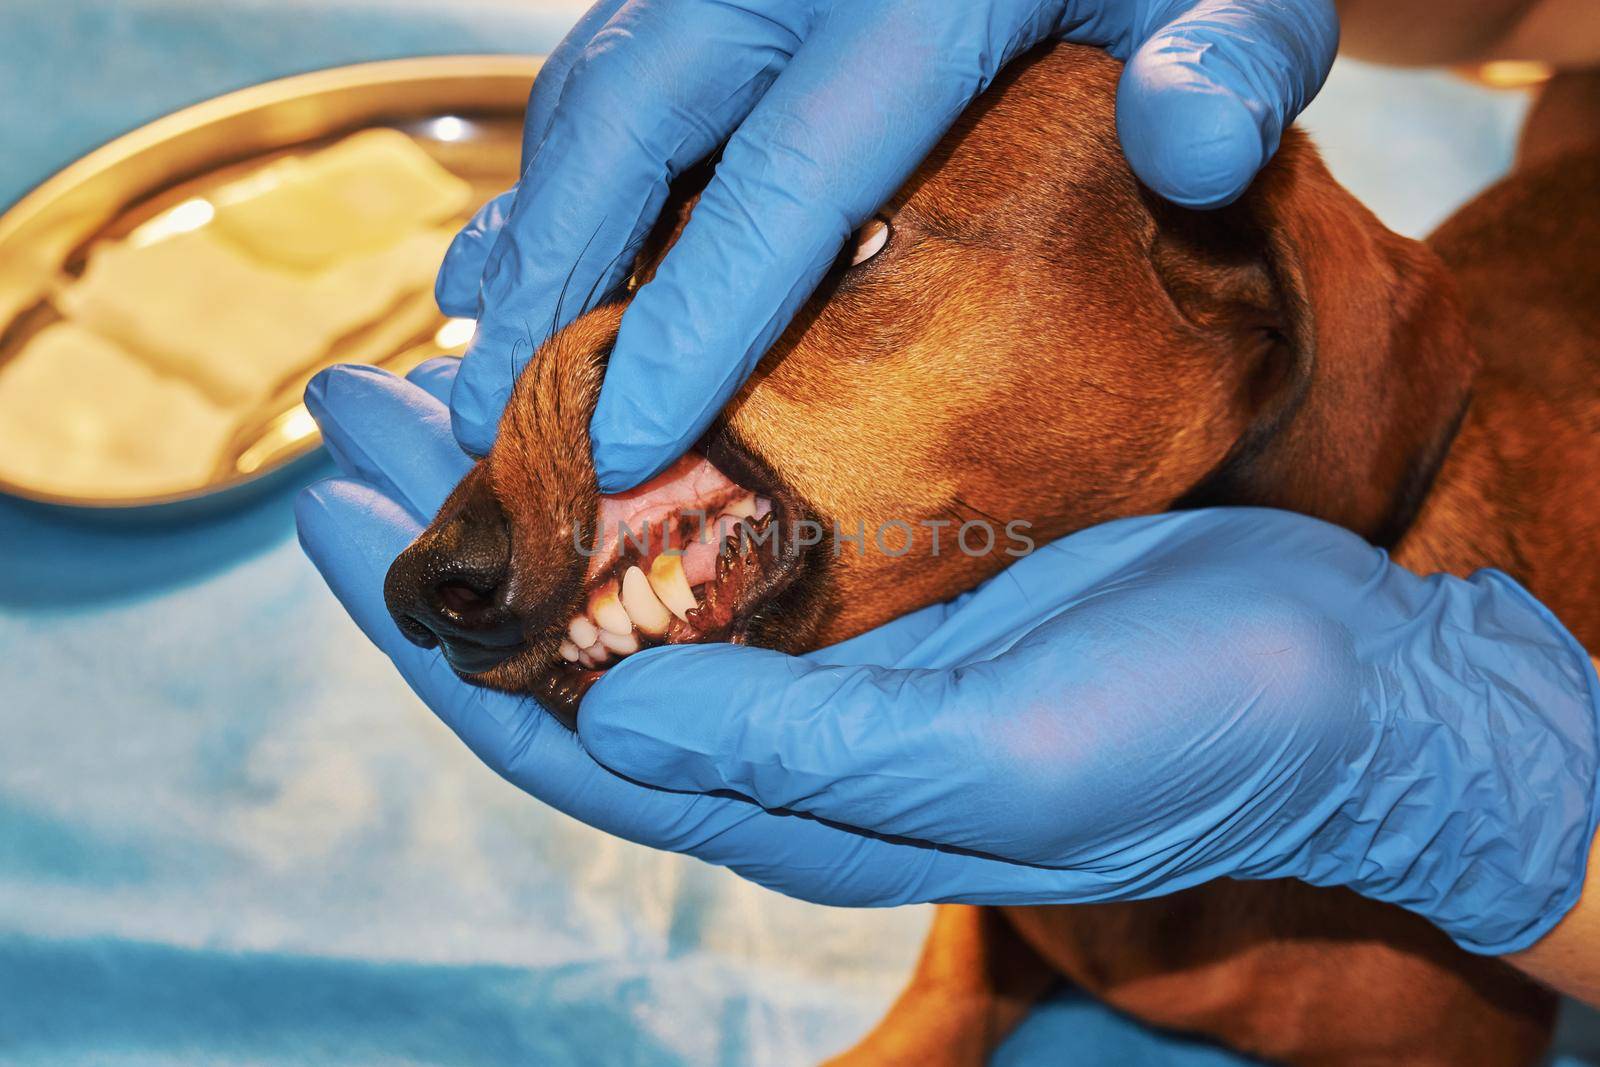 Examination of a dog's teeth at a veterinary clinic by DAndreev